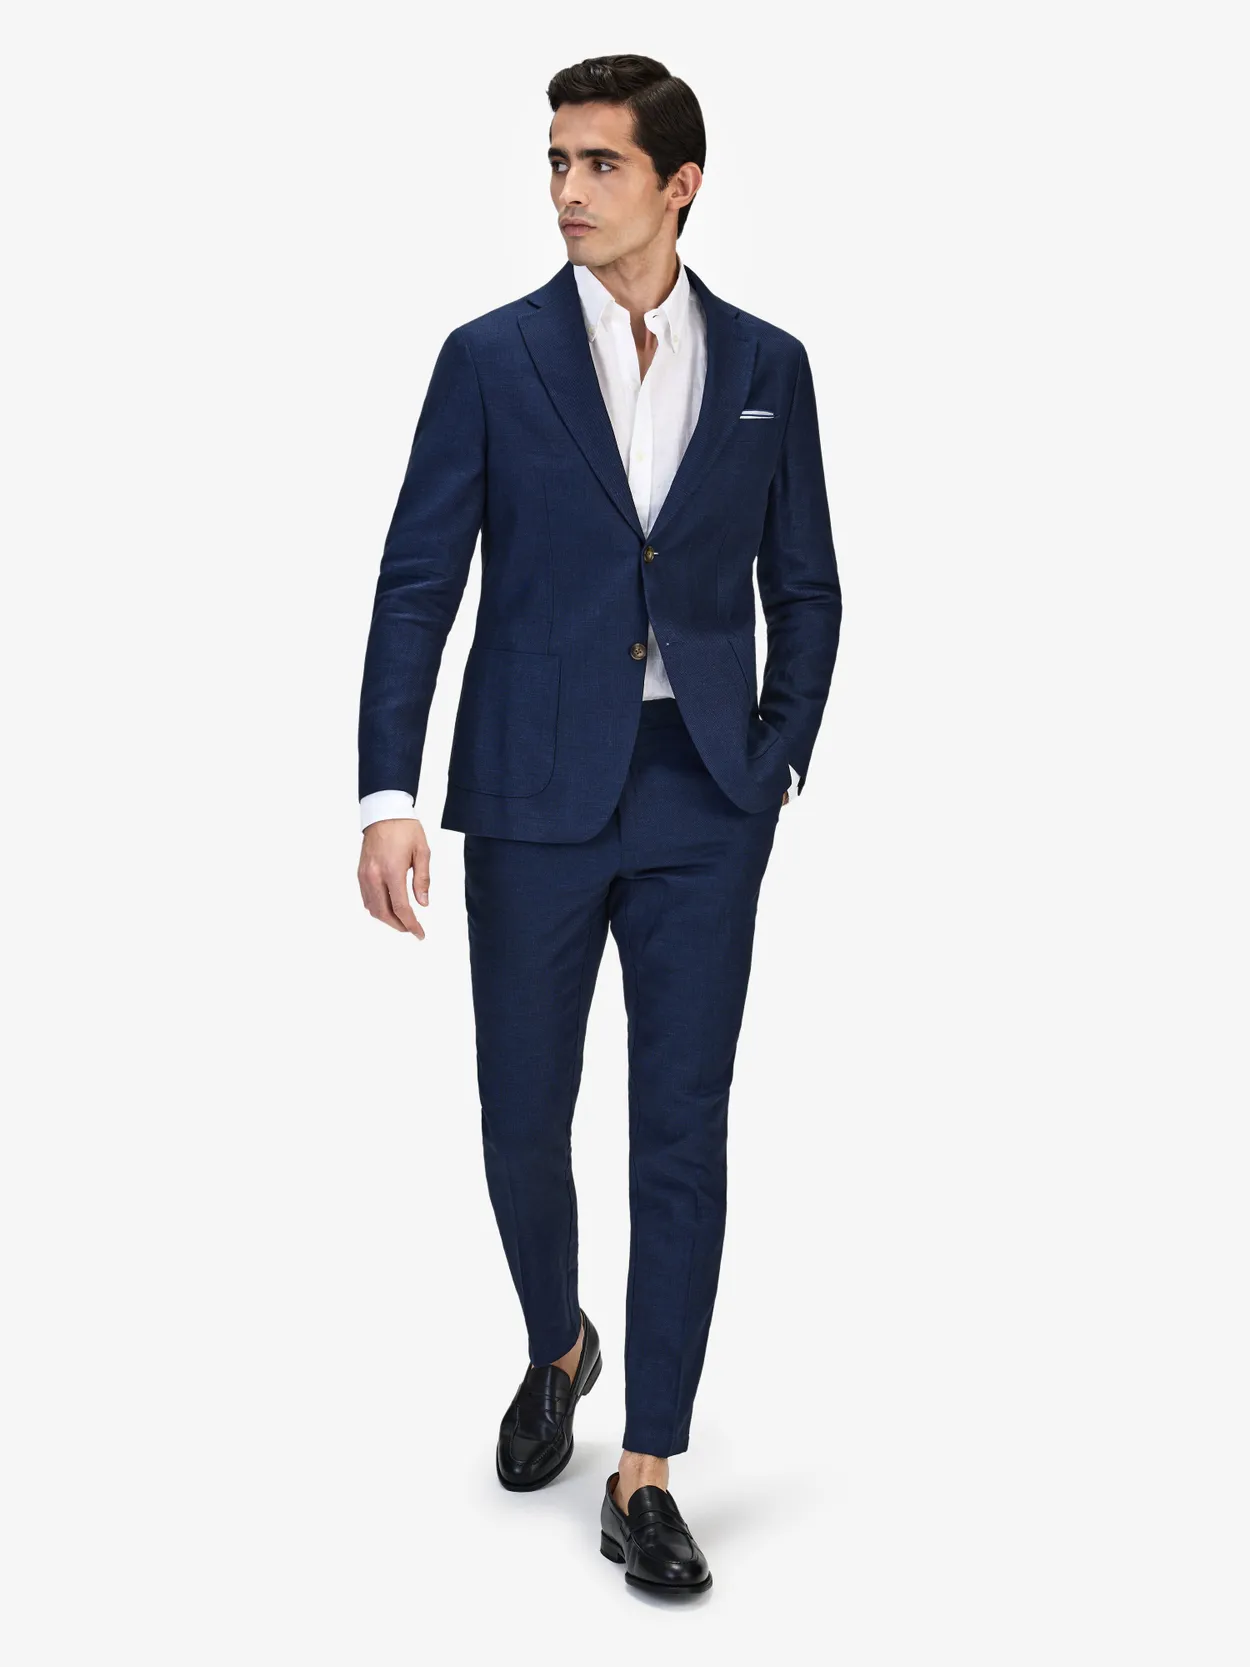 Image number 8 for product Blue Linen Suit Santino